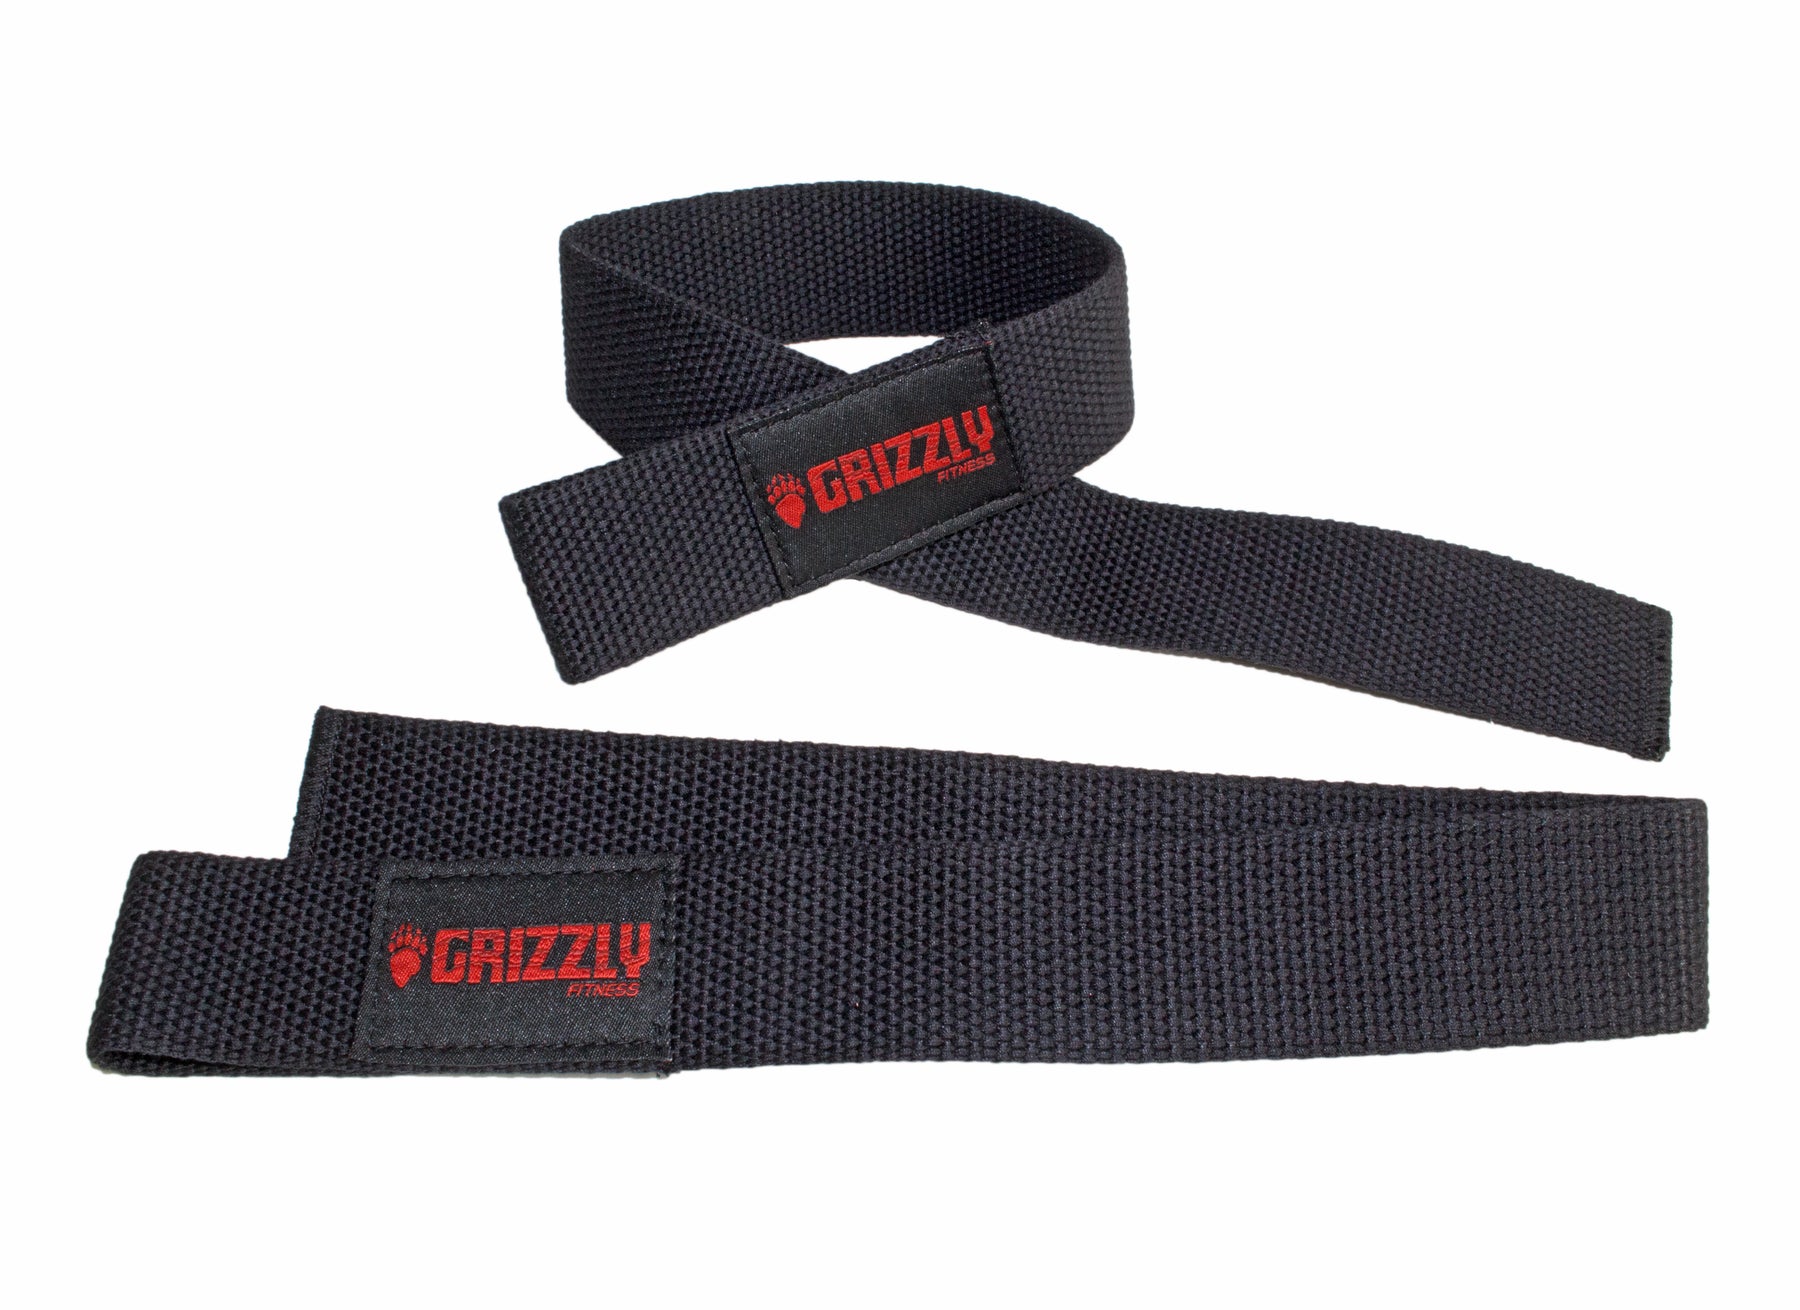 Grizzly Fitness Cotton and Nylon Weight Lifting Wrist Straps for